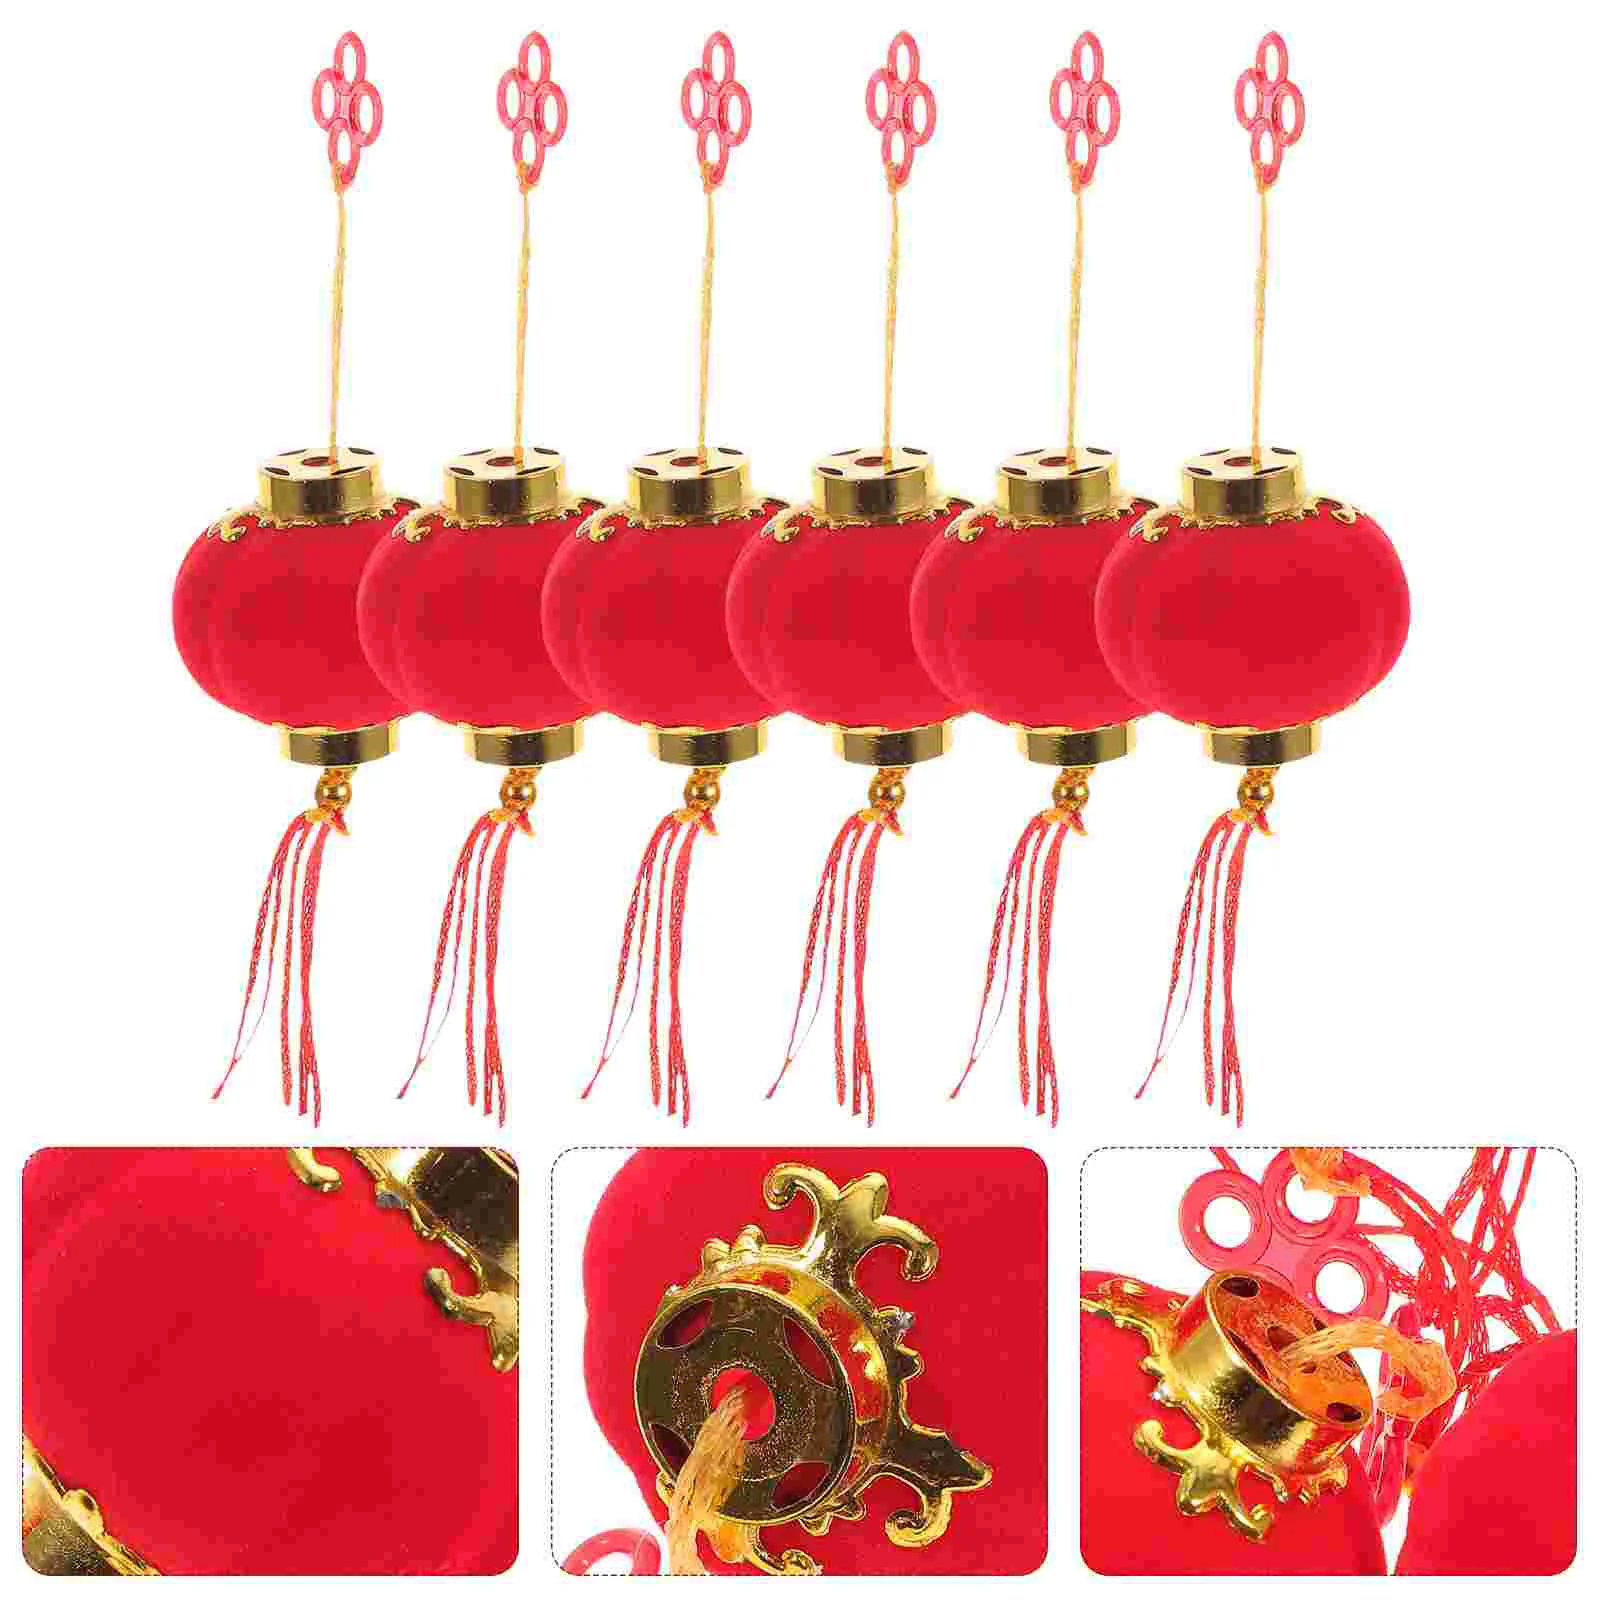 

Lanterns Chinese Lantern Festival Red Hanging New Year Spring Lucky Flocking Party Mini Paper Decorative Ornament Pendant